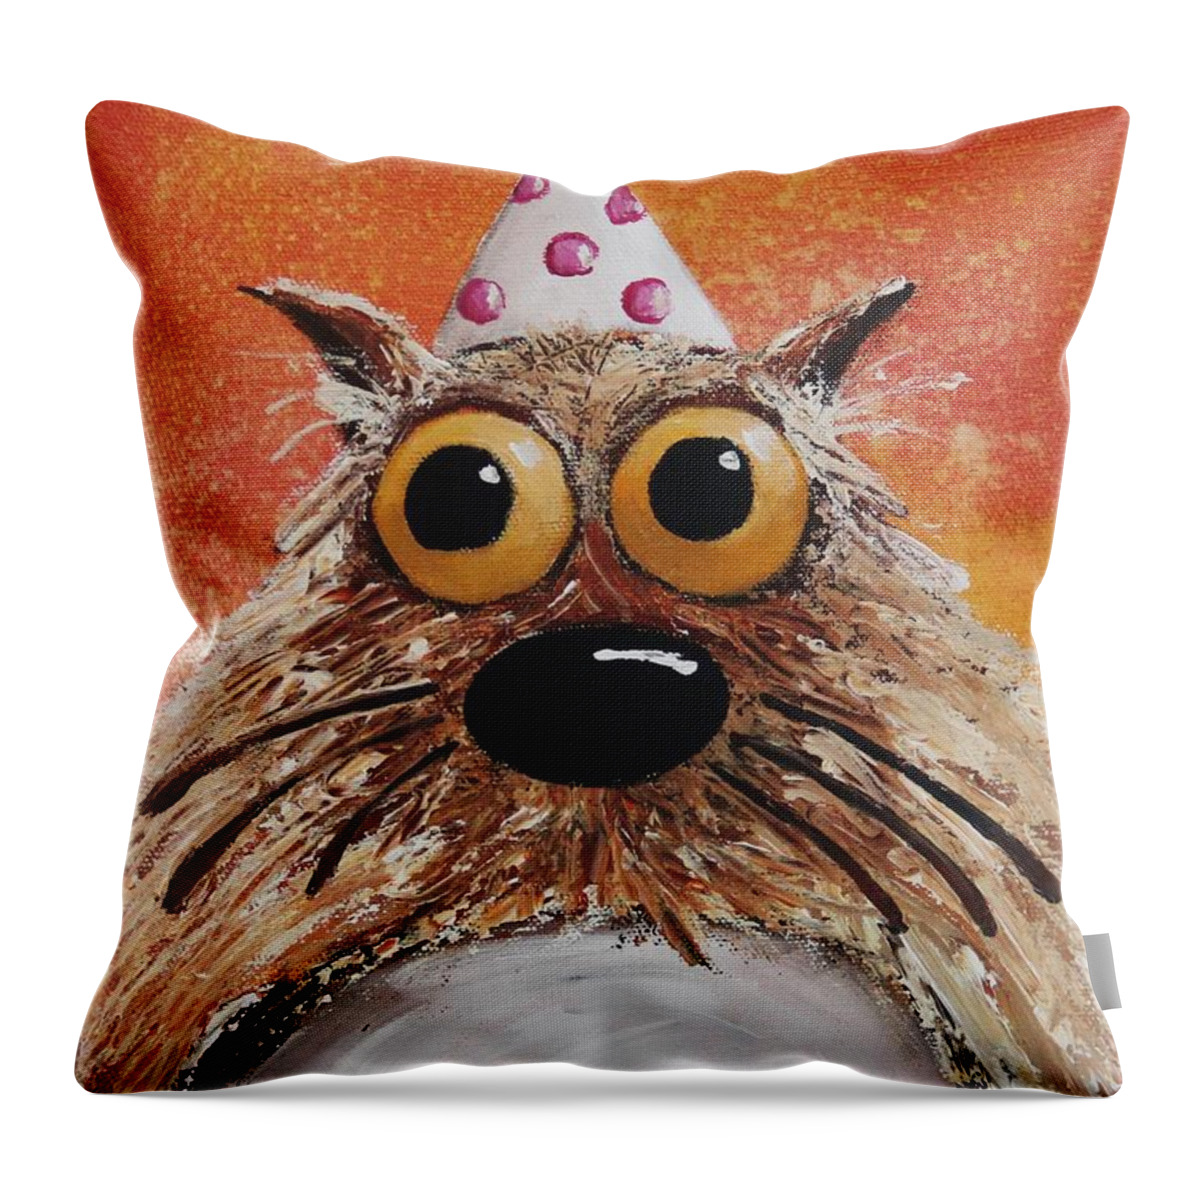 Whimsical Throw Pillow featuring the painting Catitude by Lucia Stewart